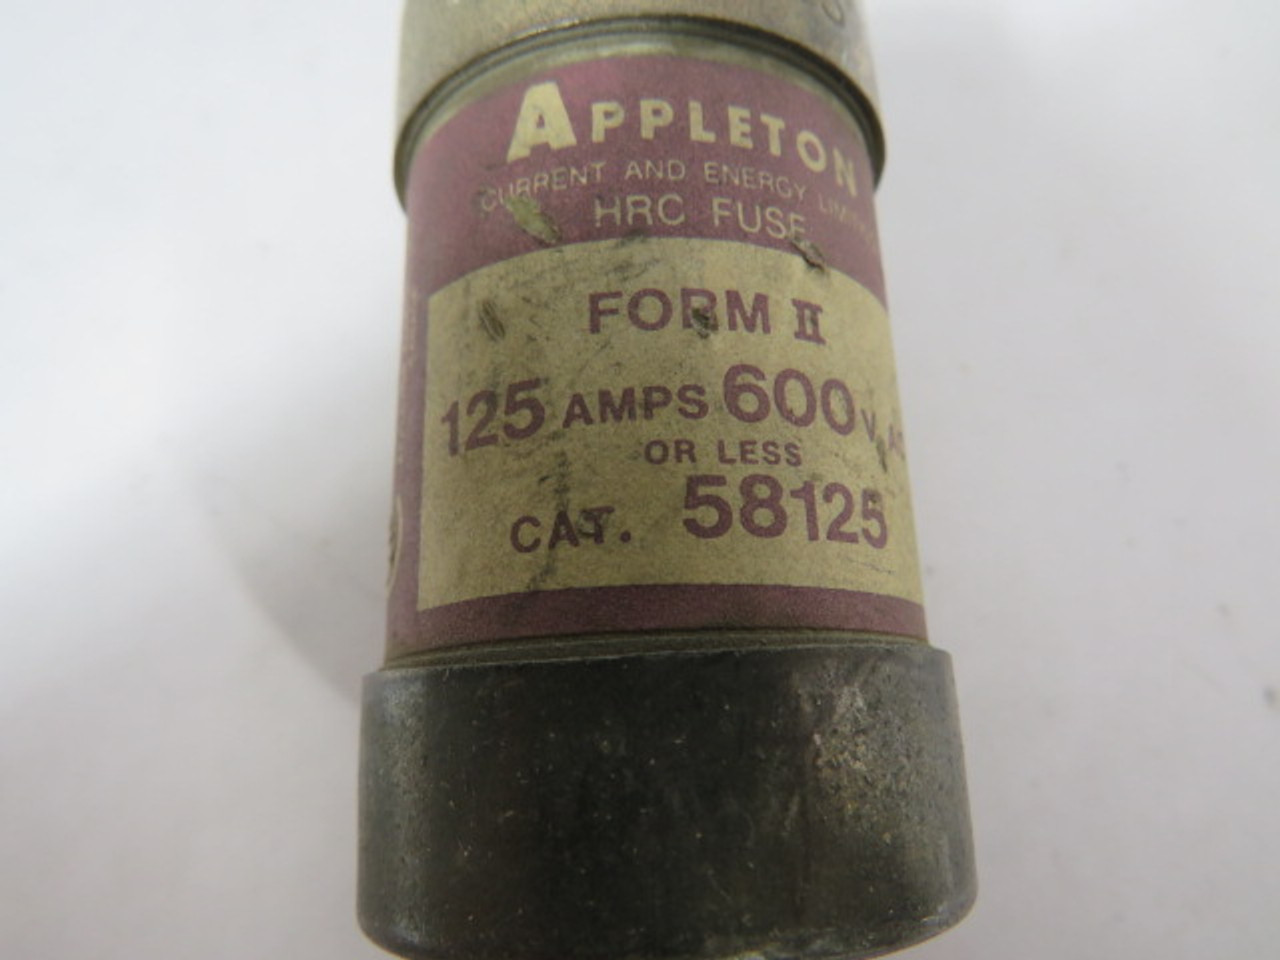 Appleton 58125 Current & Energy Limiting Fuse 125A 600VAC USED